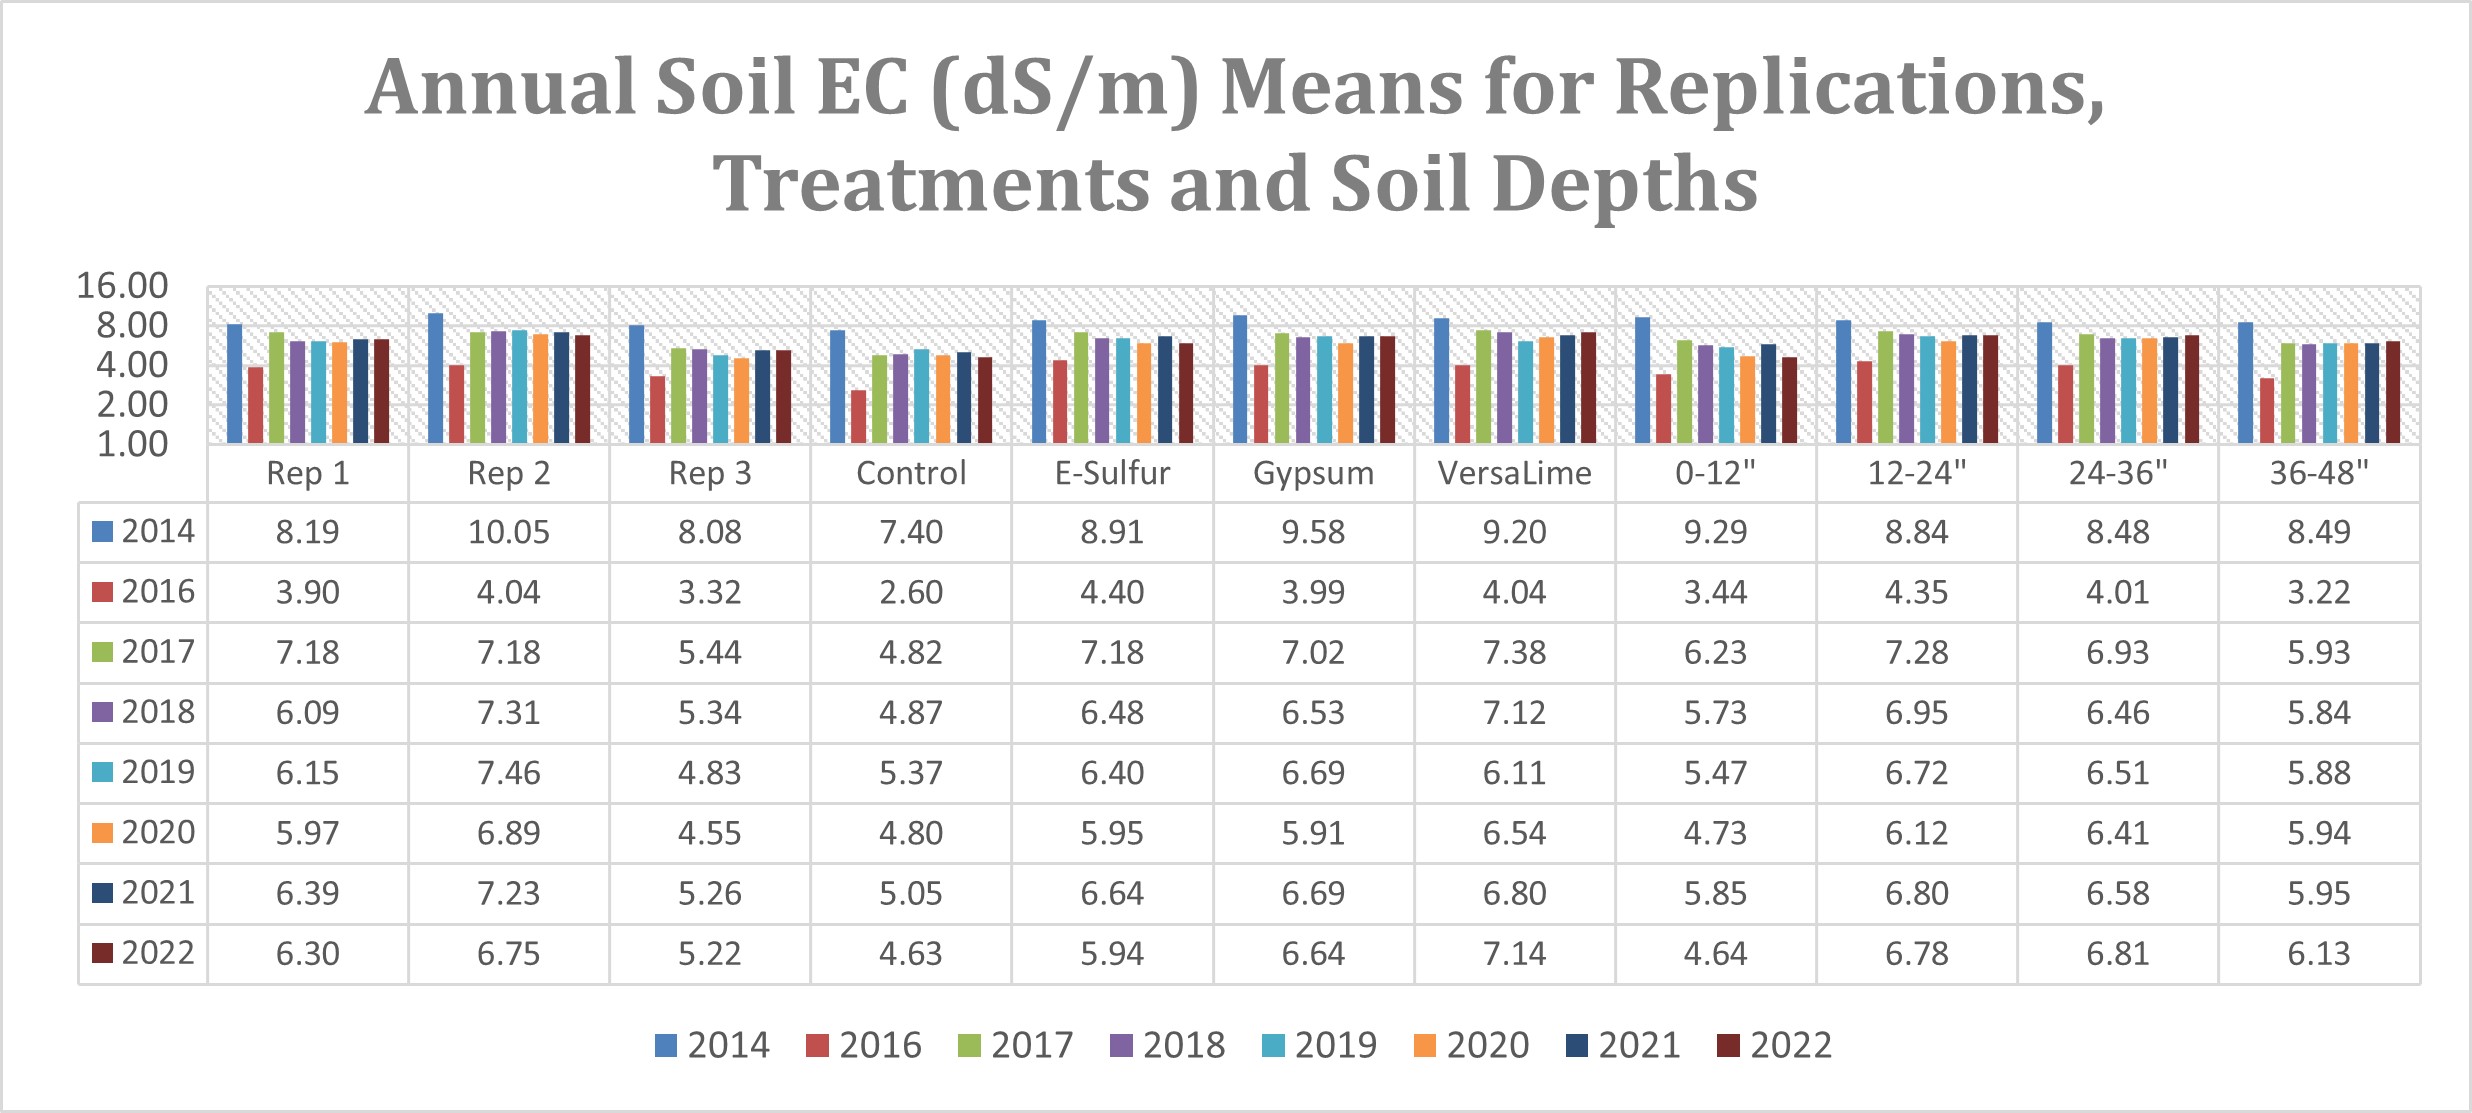 Annual Soil EC (dS/m) Means for Replications, Treatments and Soil Depths 2014, 2016-2022